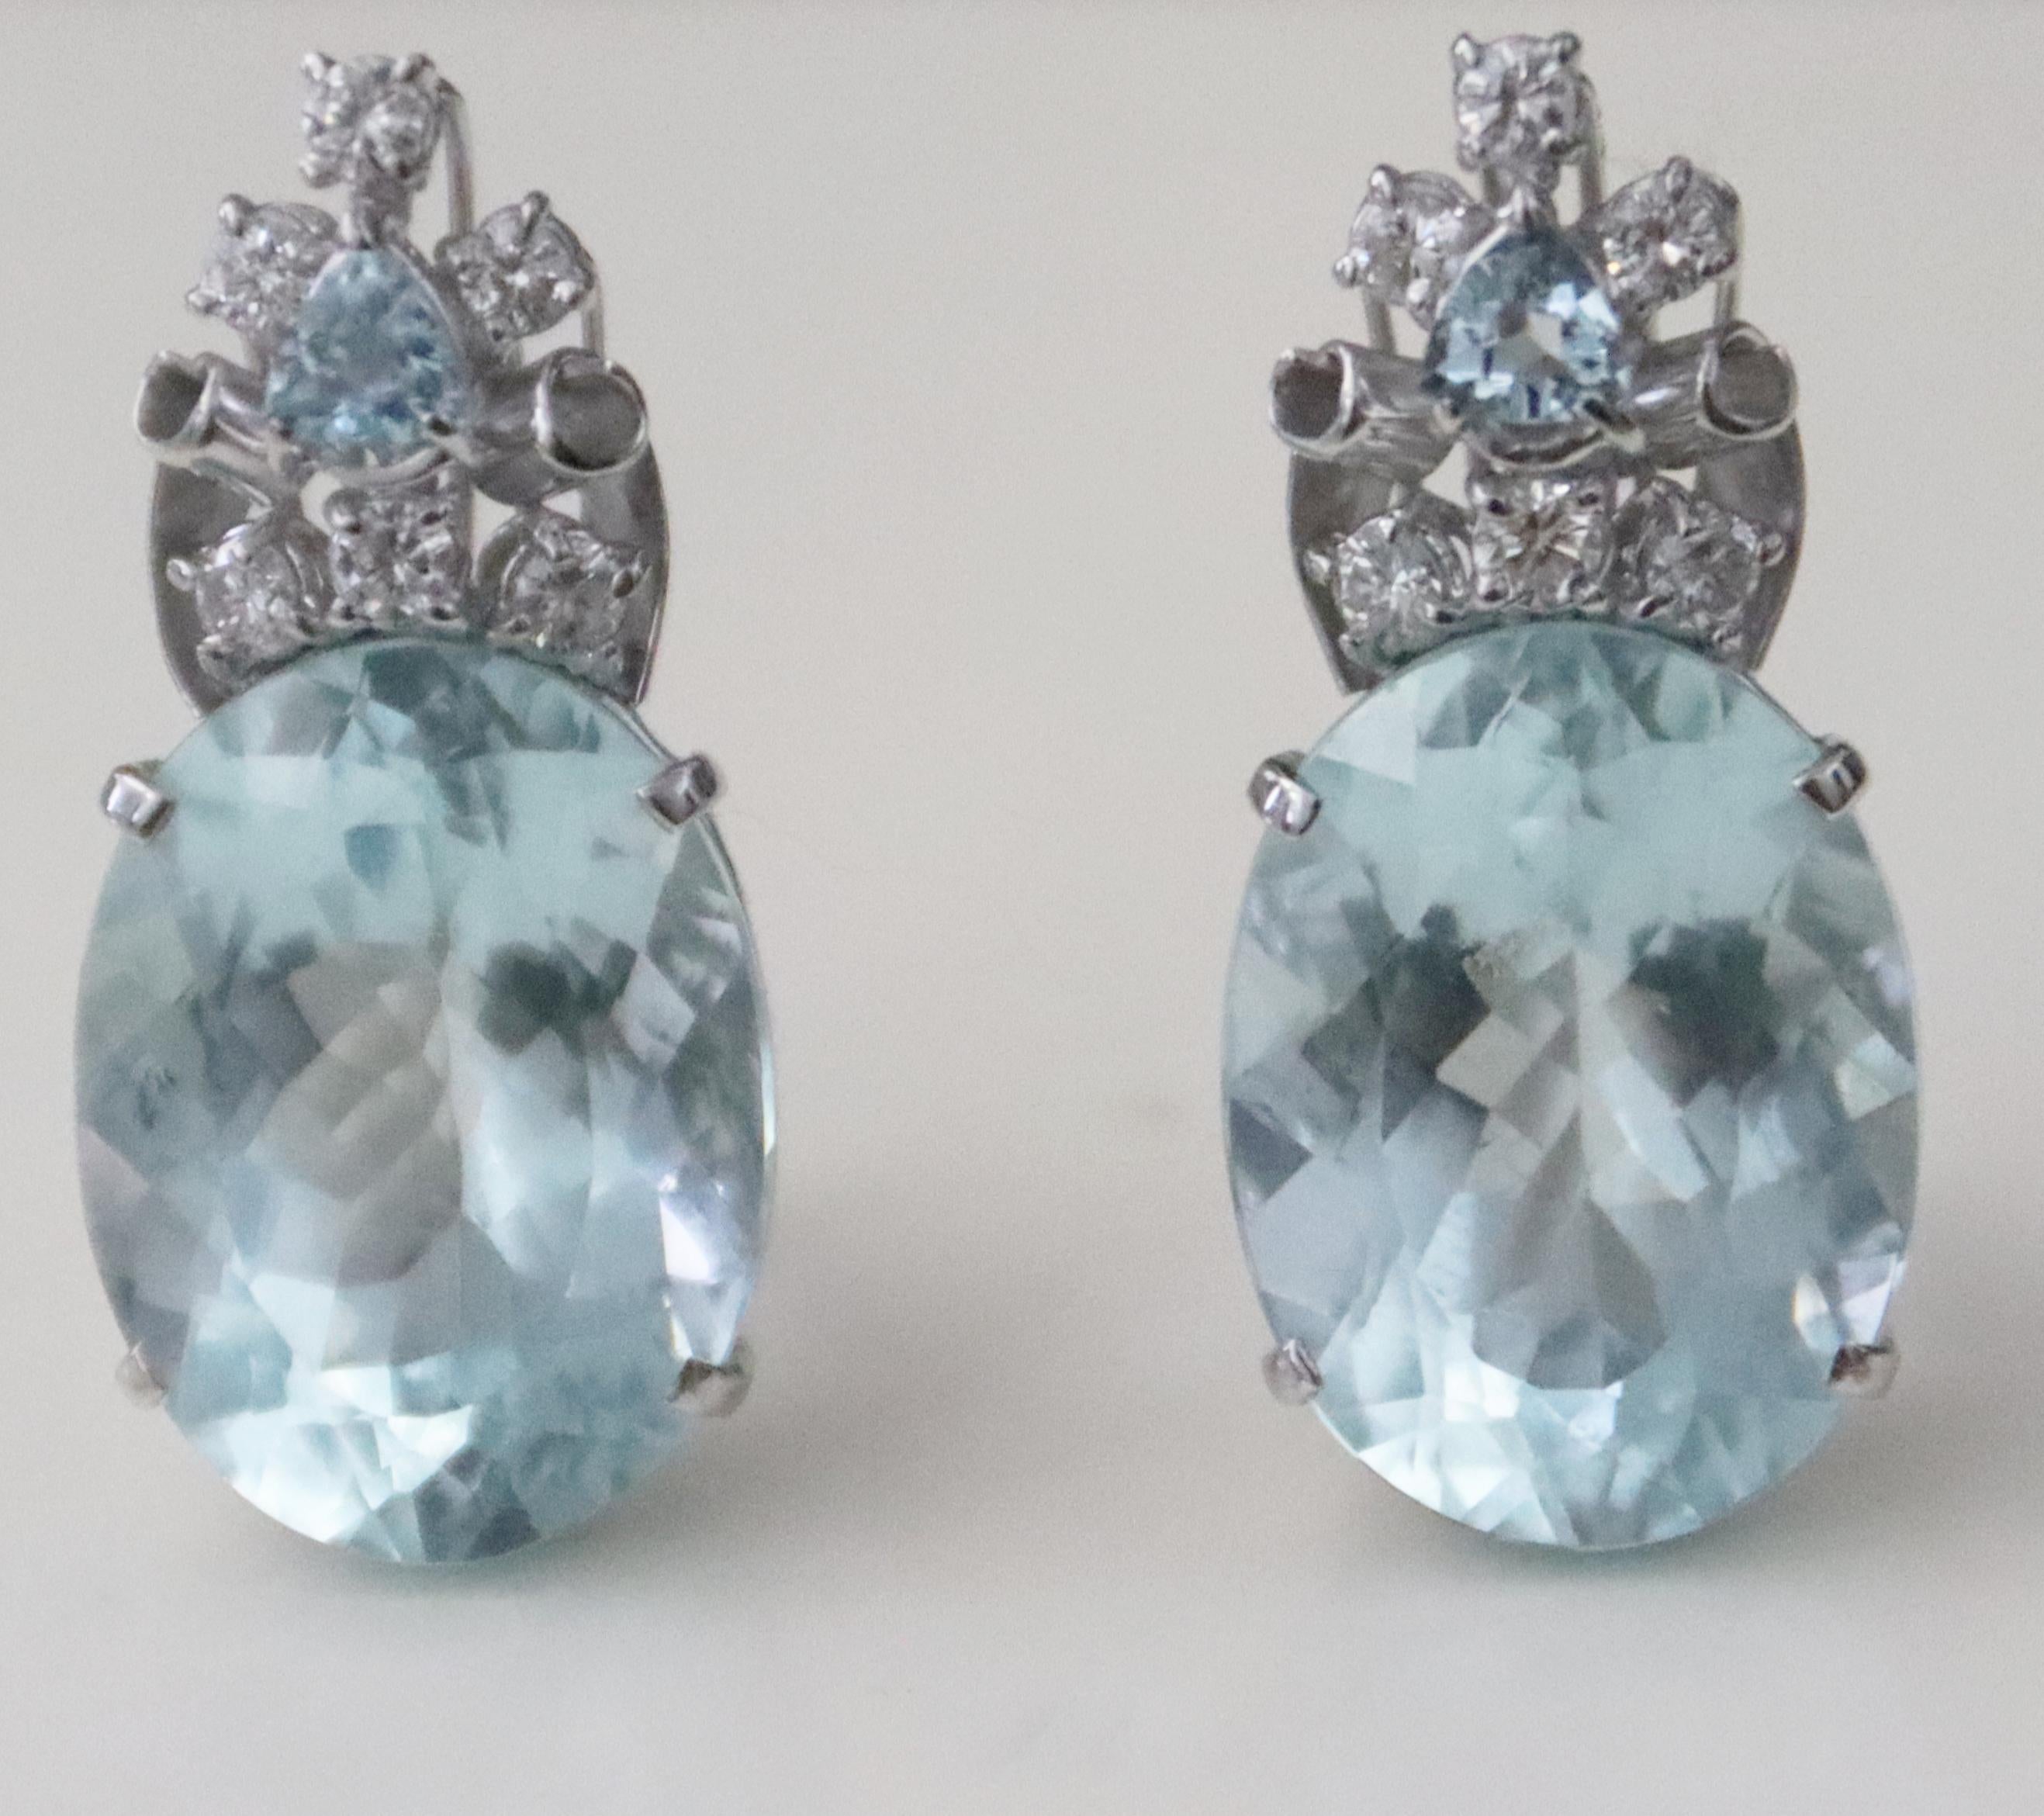 18 karat white gold stud earrings. Handmade by our craftsmen and assembled with Brazilian aquamarine and diamonds

Earrings total weight 18.40 grams
Aquamarine weight 16.50 karat
Diamonds weight 0.41 karat

